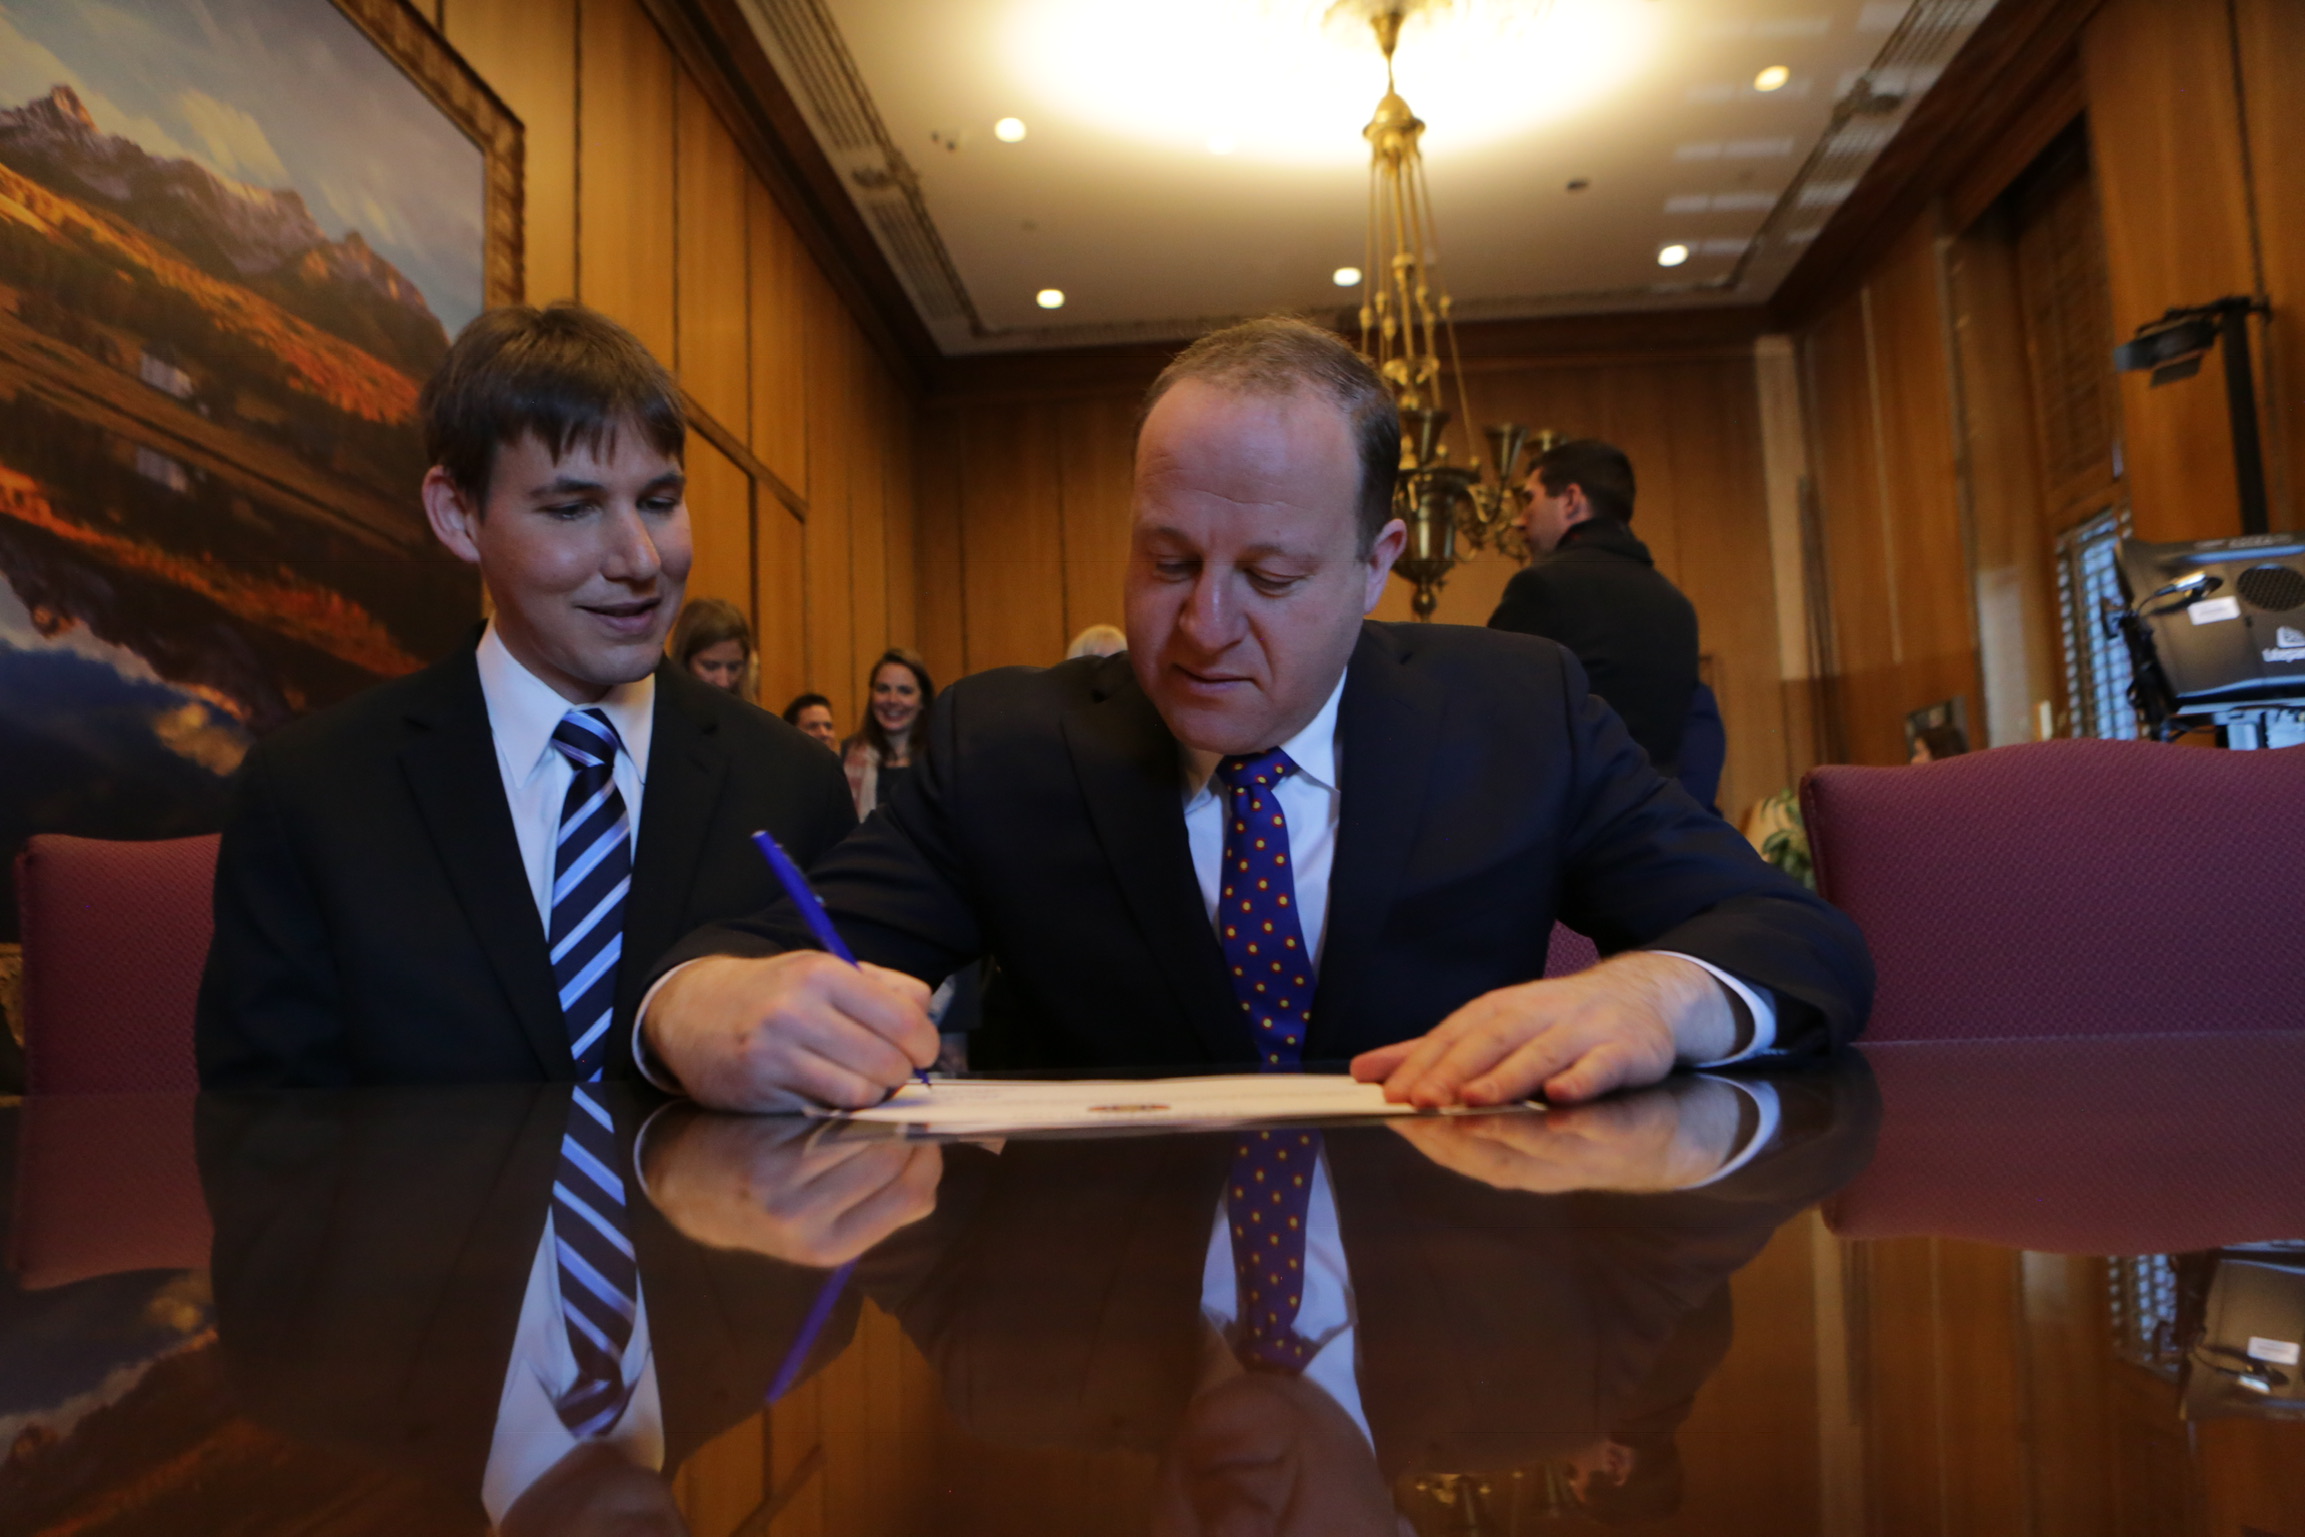 Governor Polis with First Gentleman Reis Signing a Document